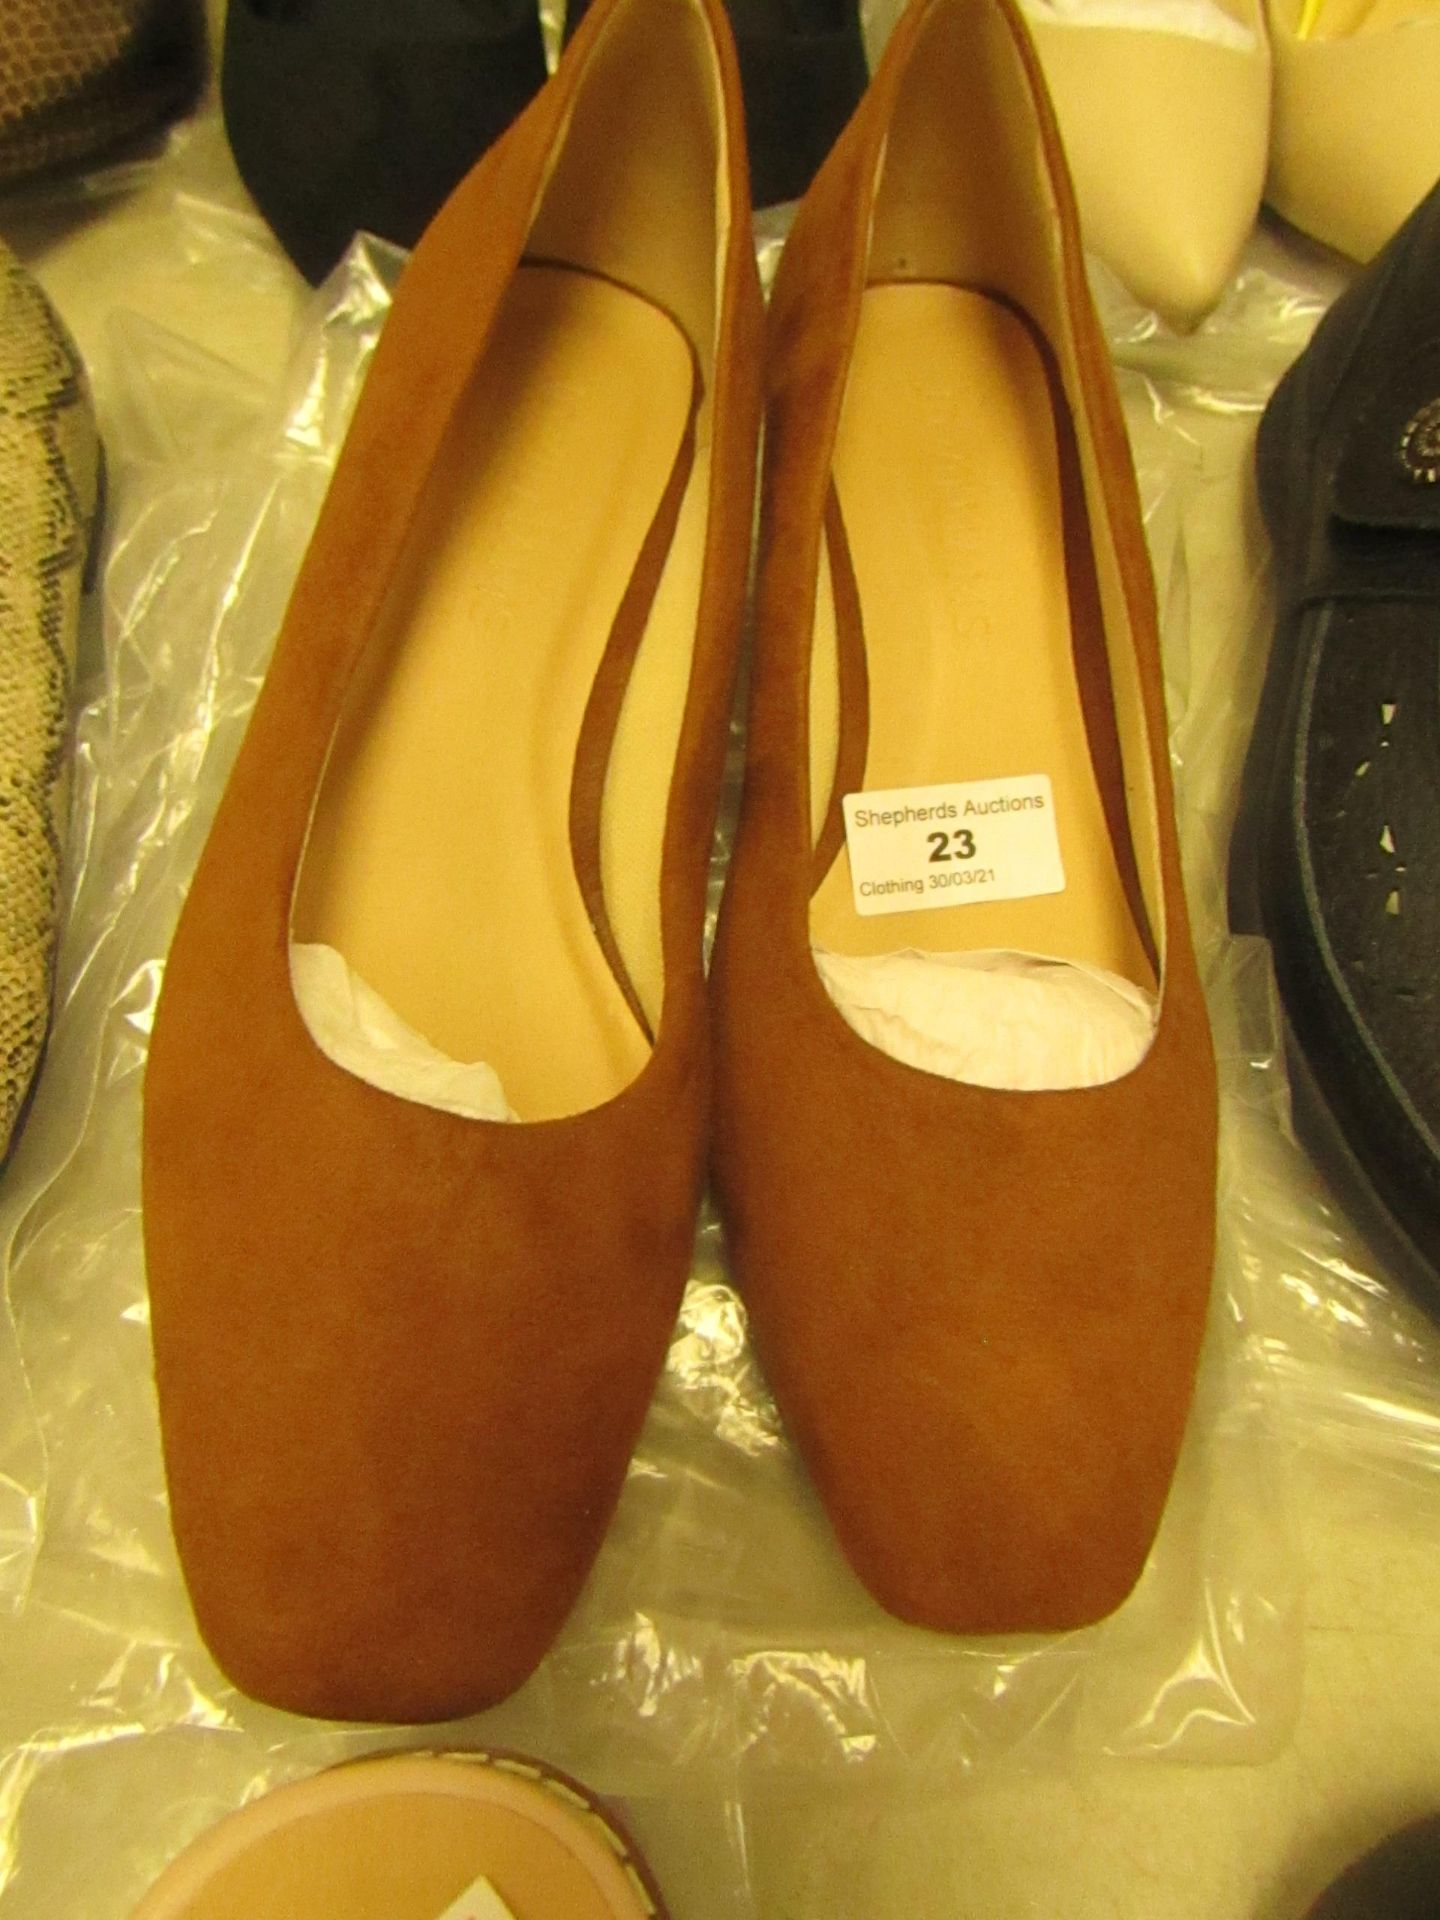 1 x JD Williams Tan Block Heel Shoes size 4 new see image for style